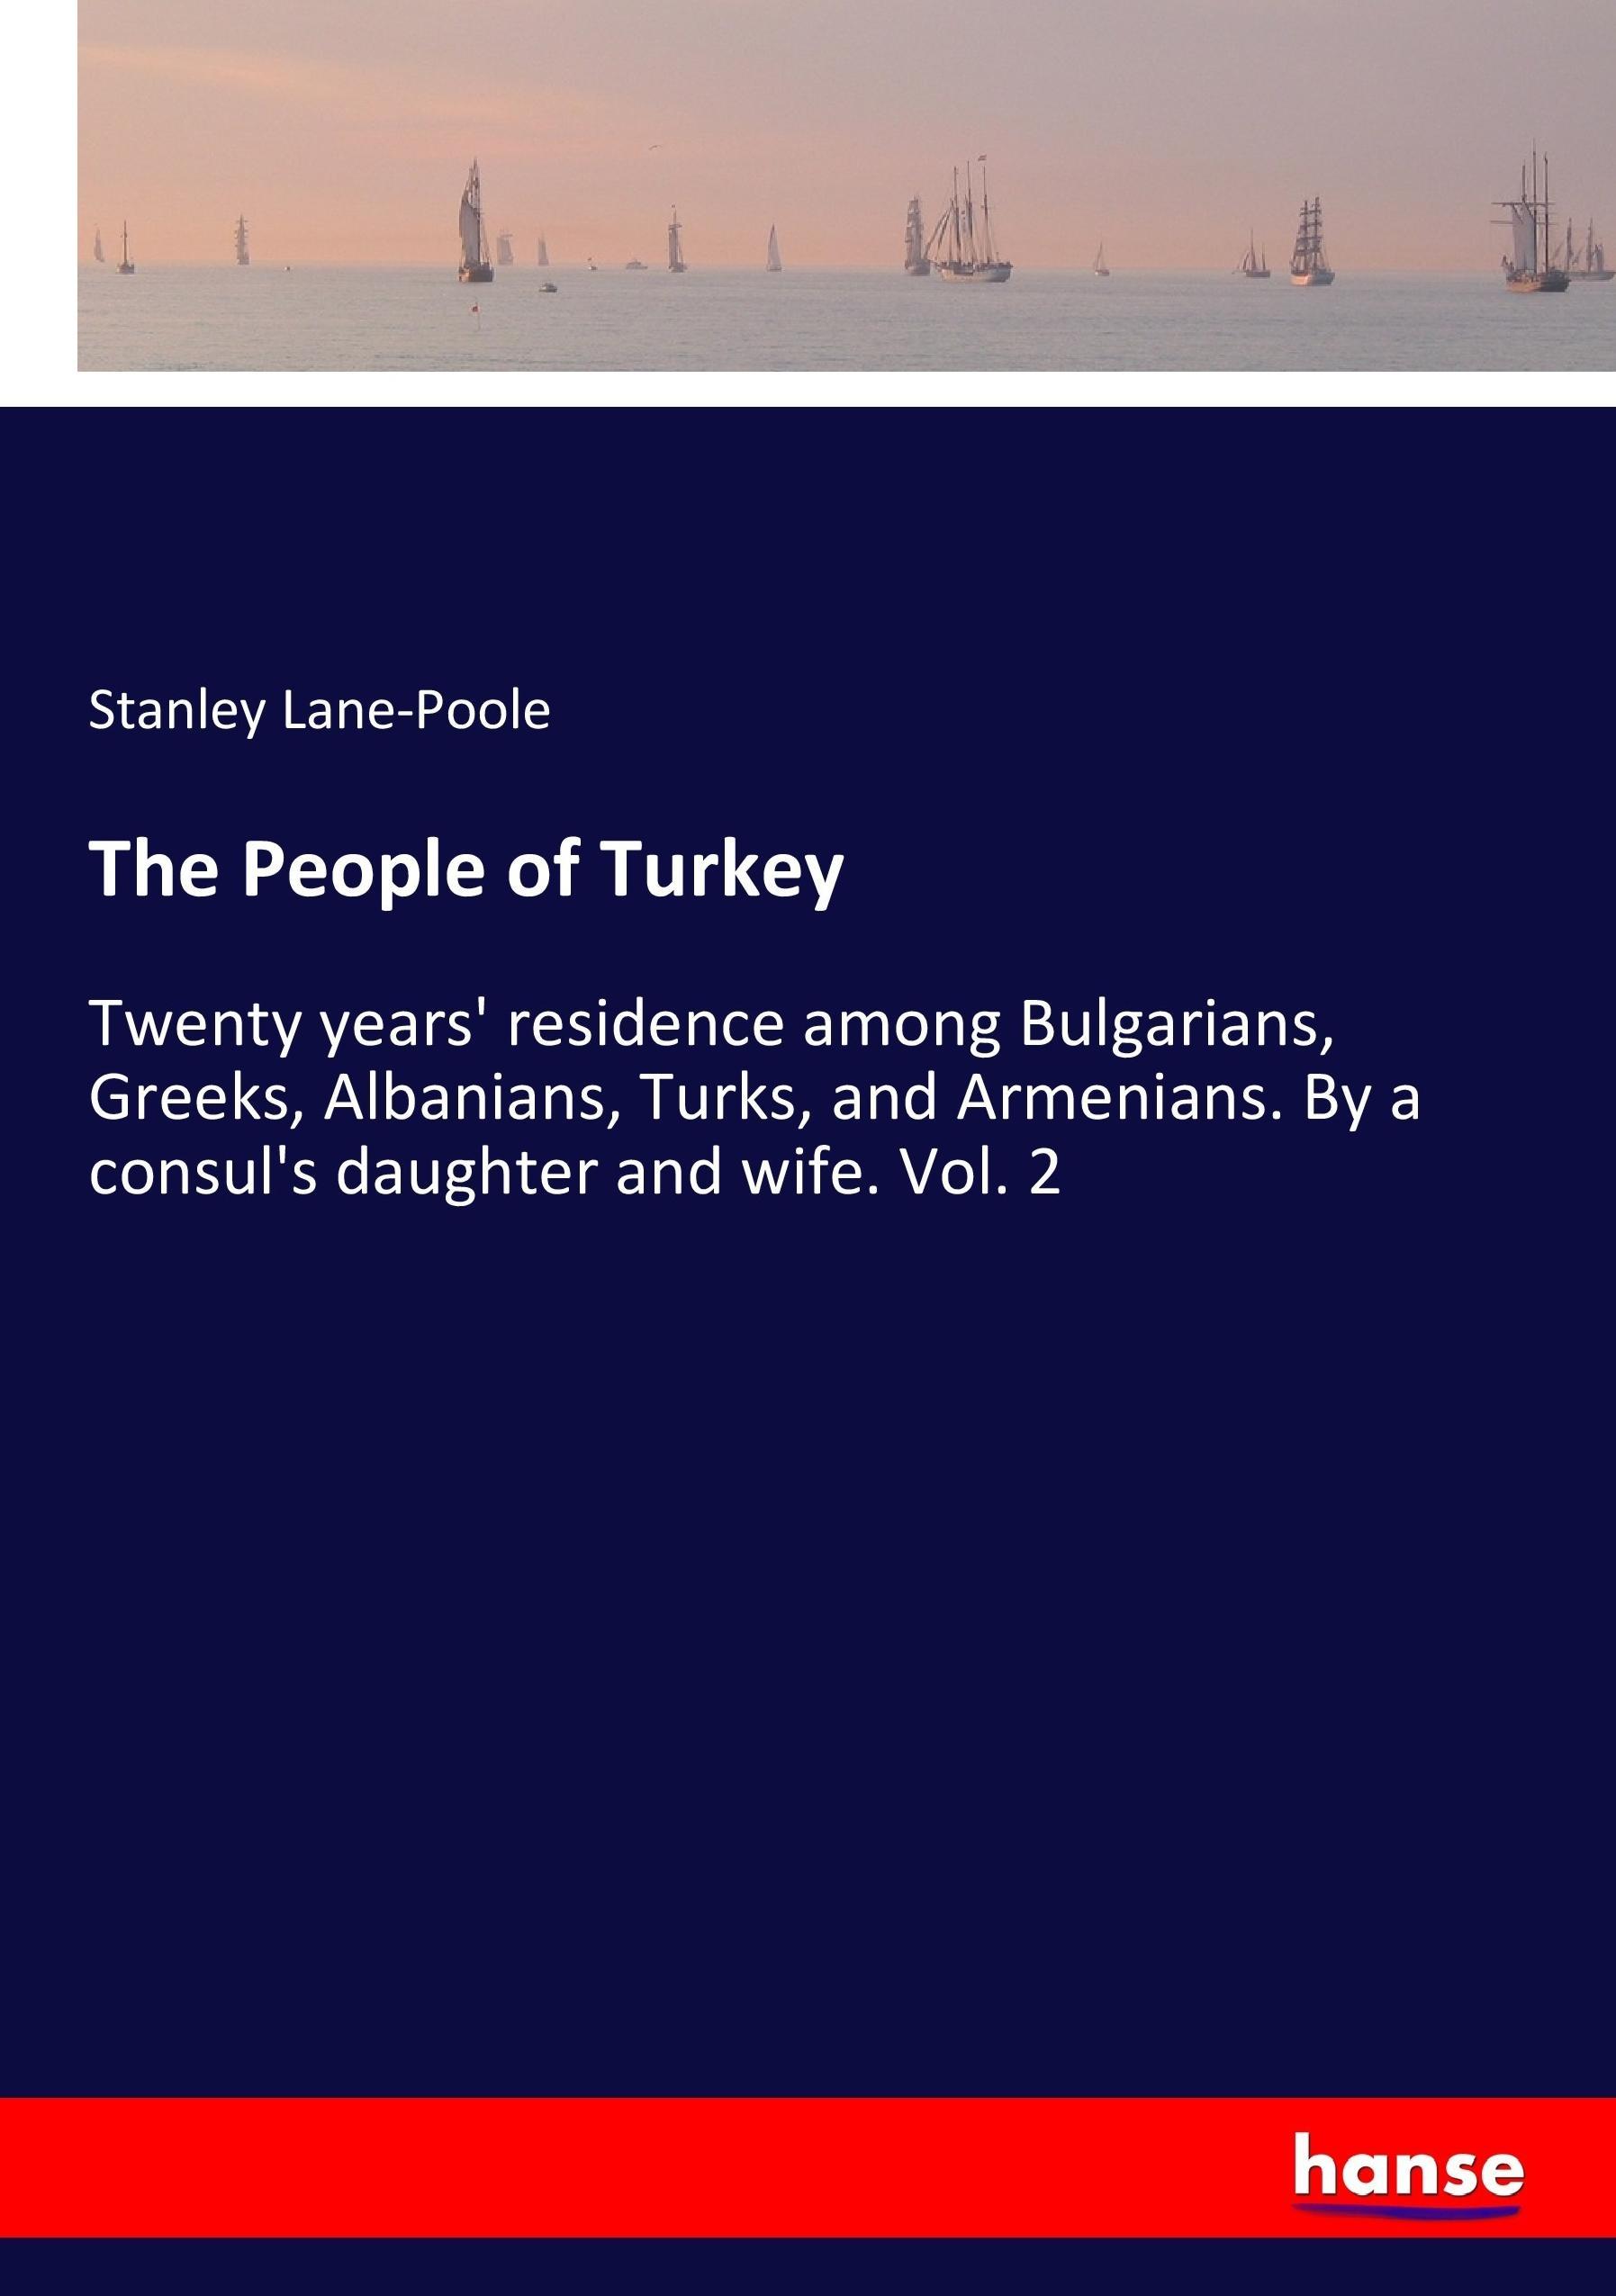 The People of Turkey | Twenty years' residence among Bulgarians, Greeks, Albanians, Turks, and Armenians. By a consul's daughter and wife. Vol. 2 | Stanley Lane-Poole | Taschenbuch | Paperback | 2017 - Lane-Poole, Stanley